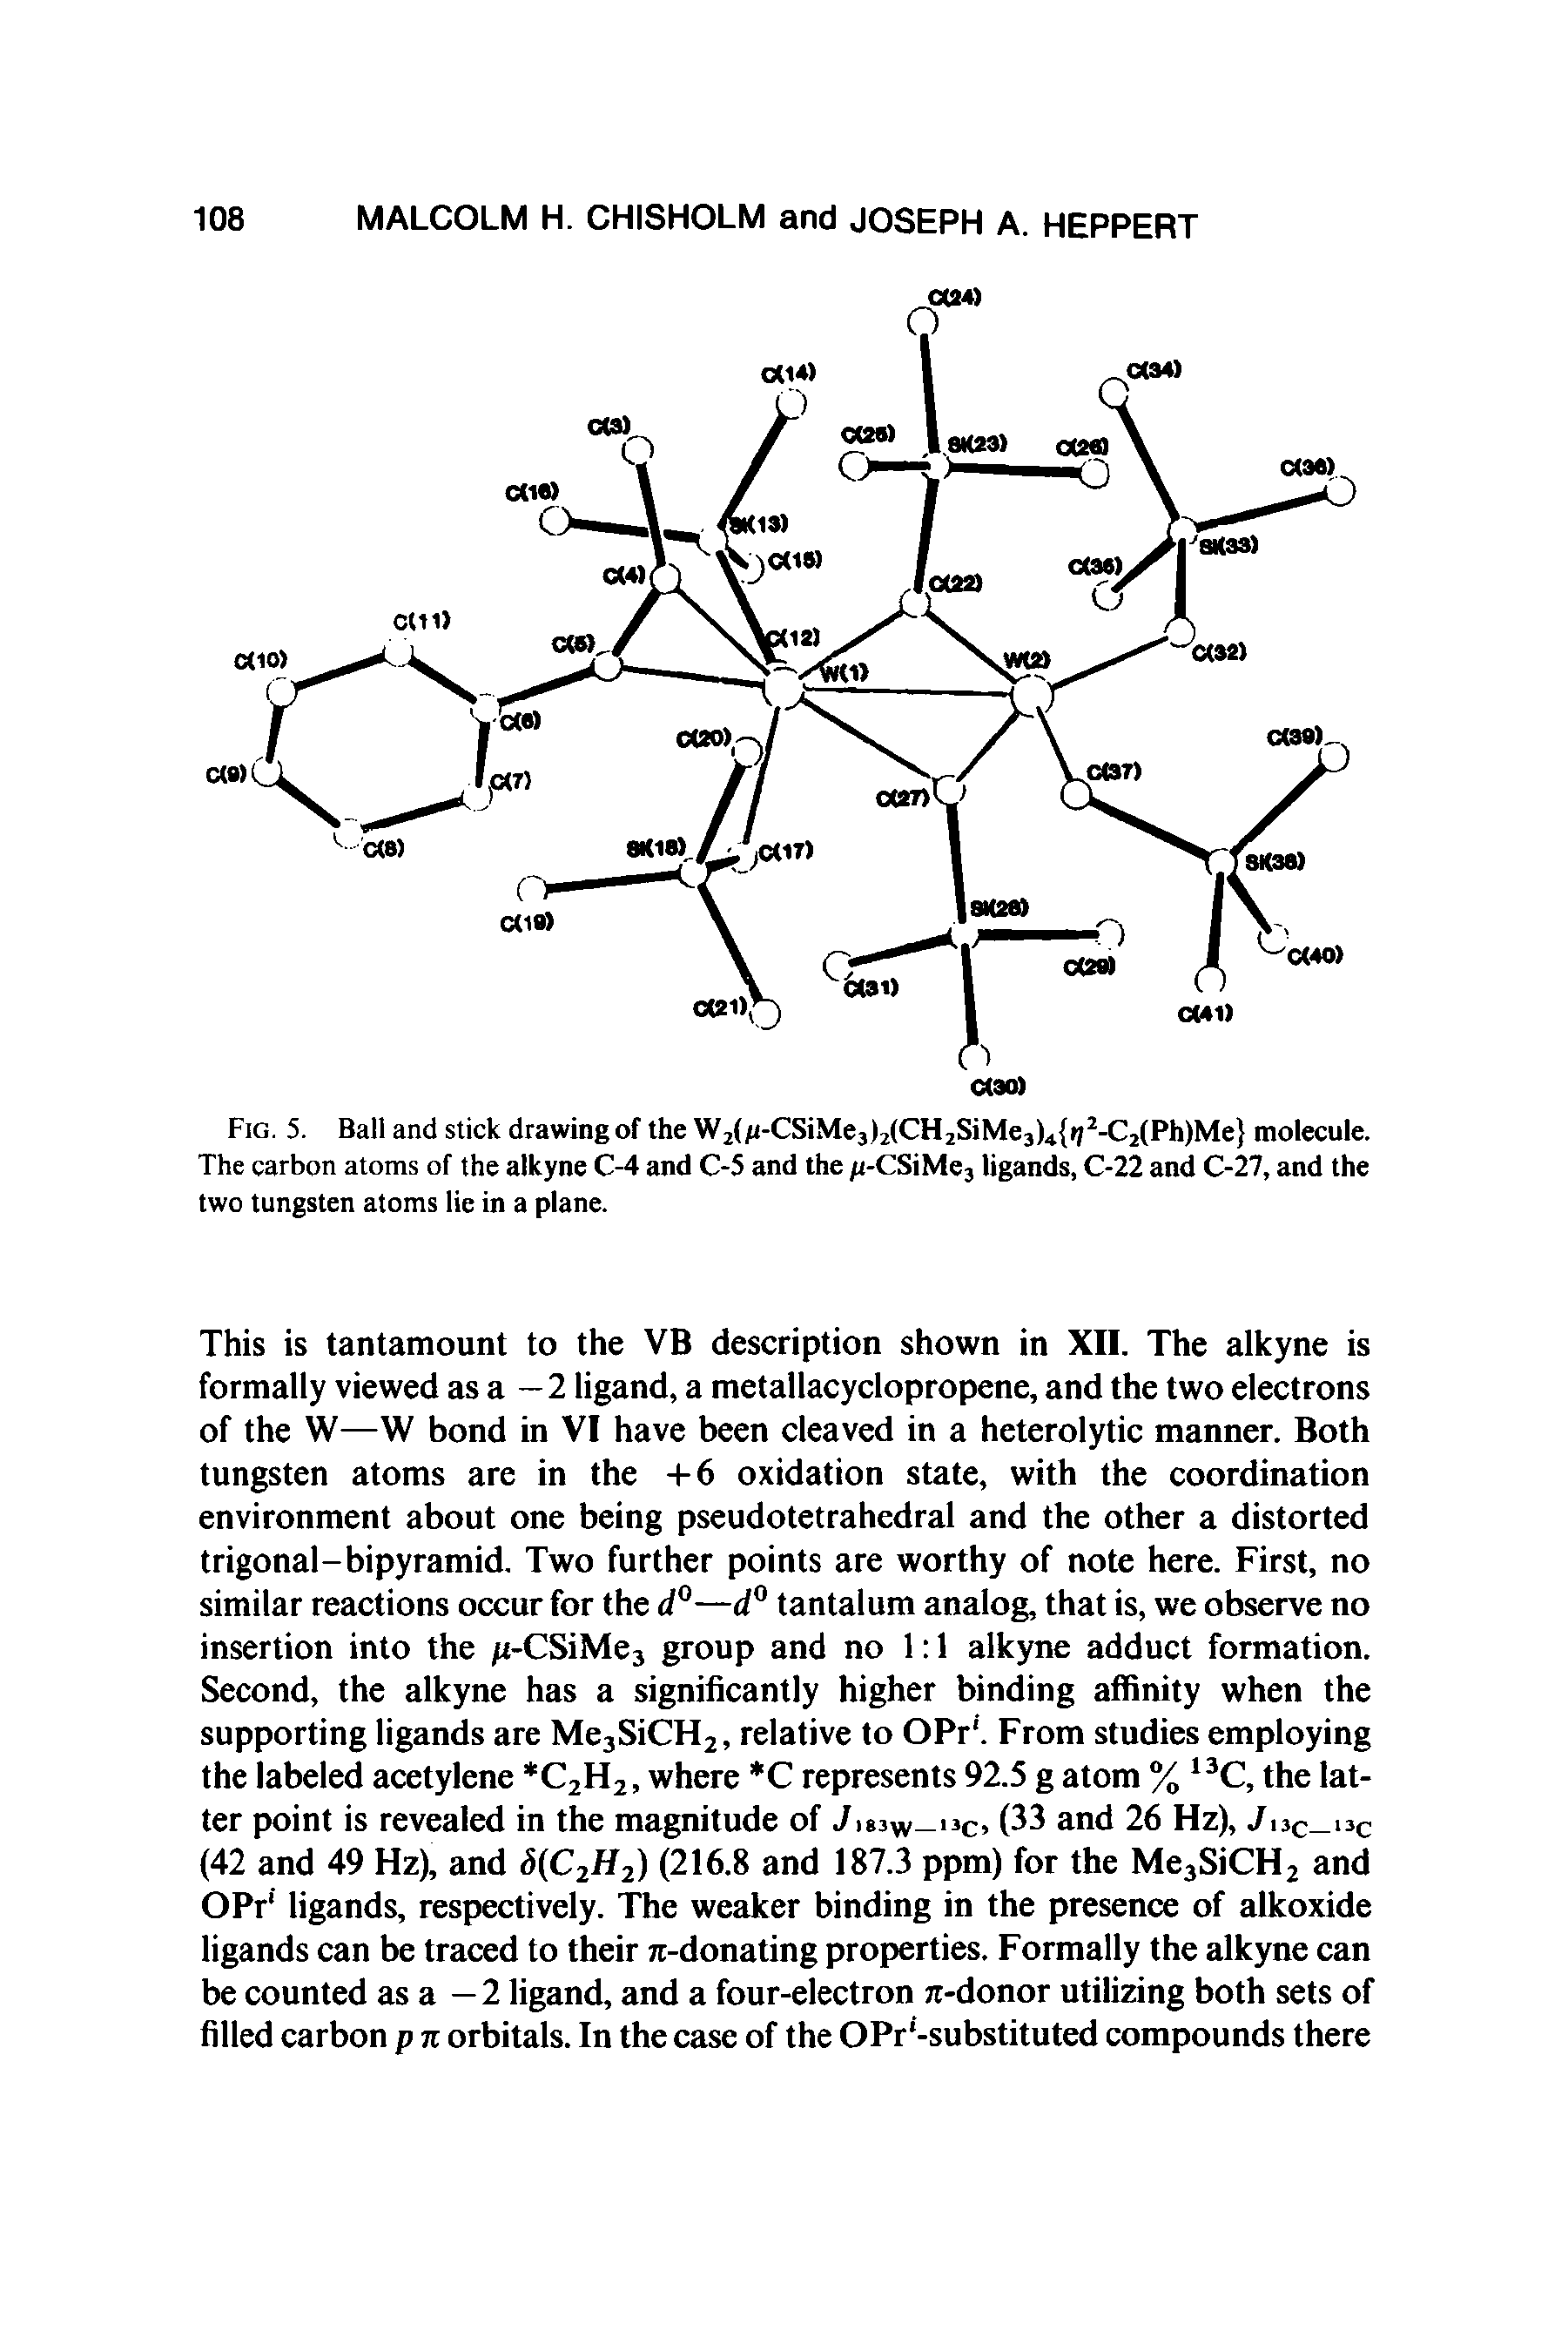 Fig. 5. Ball and stick drawing of the W2(/i-CSiMe3 2(CH2SiMe3)4 f 2-C2(Ph)Me molecule. The carbon atoms of the alkyne C-4 and C-5 and the /i-CSiMe3 ligands, C-22 and C-27, and the two tungsten atoms lie in a plane.